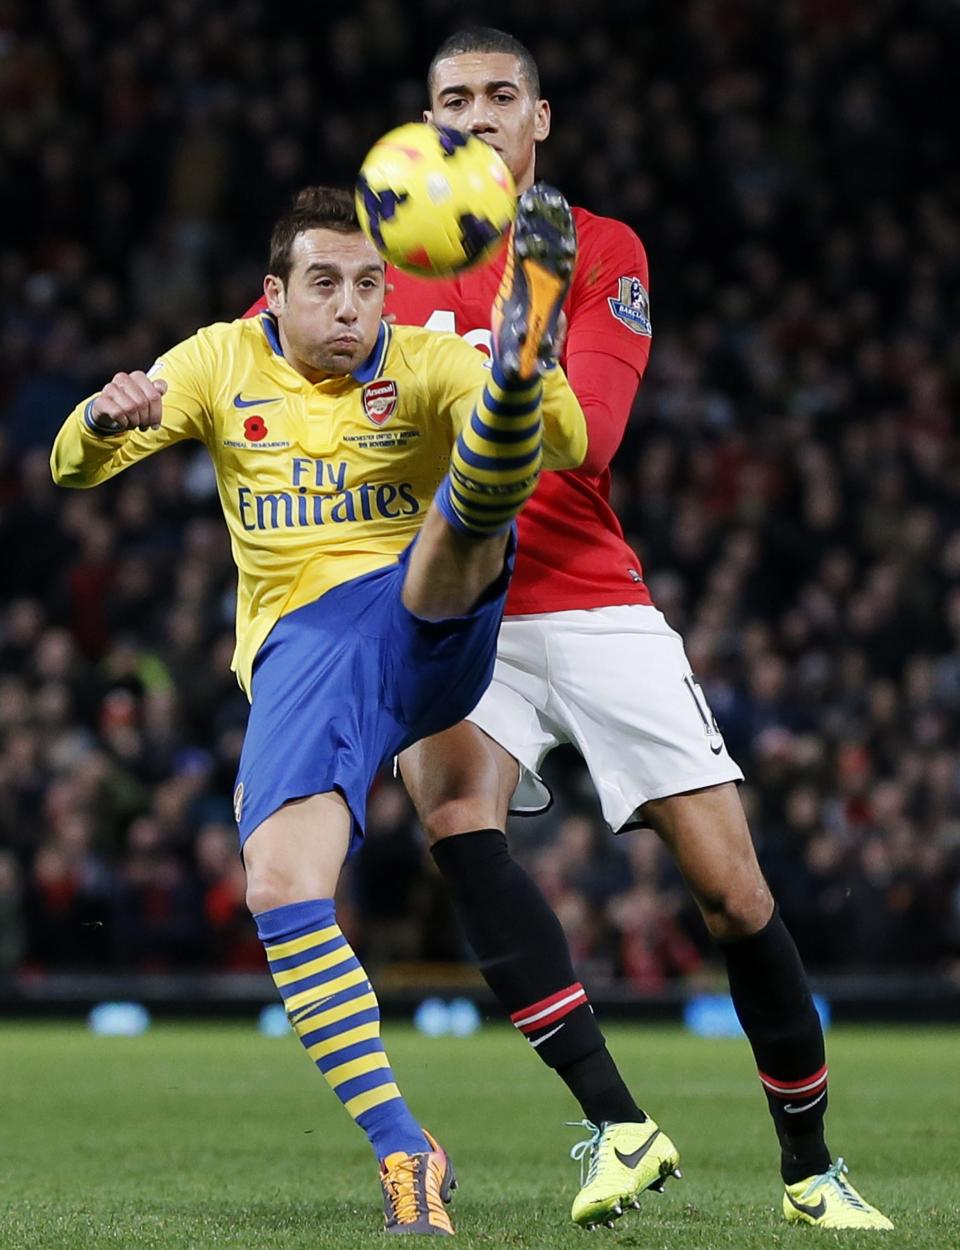 Manchester United's Chris Smalling challenges Arsenal's Olivier Giroud during their English Premier League soccer match at Old Trafford in Manchester, northern England, November 10, 2013.